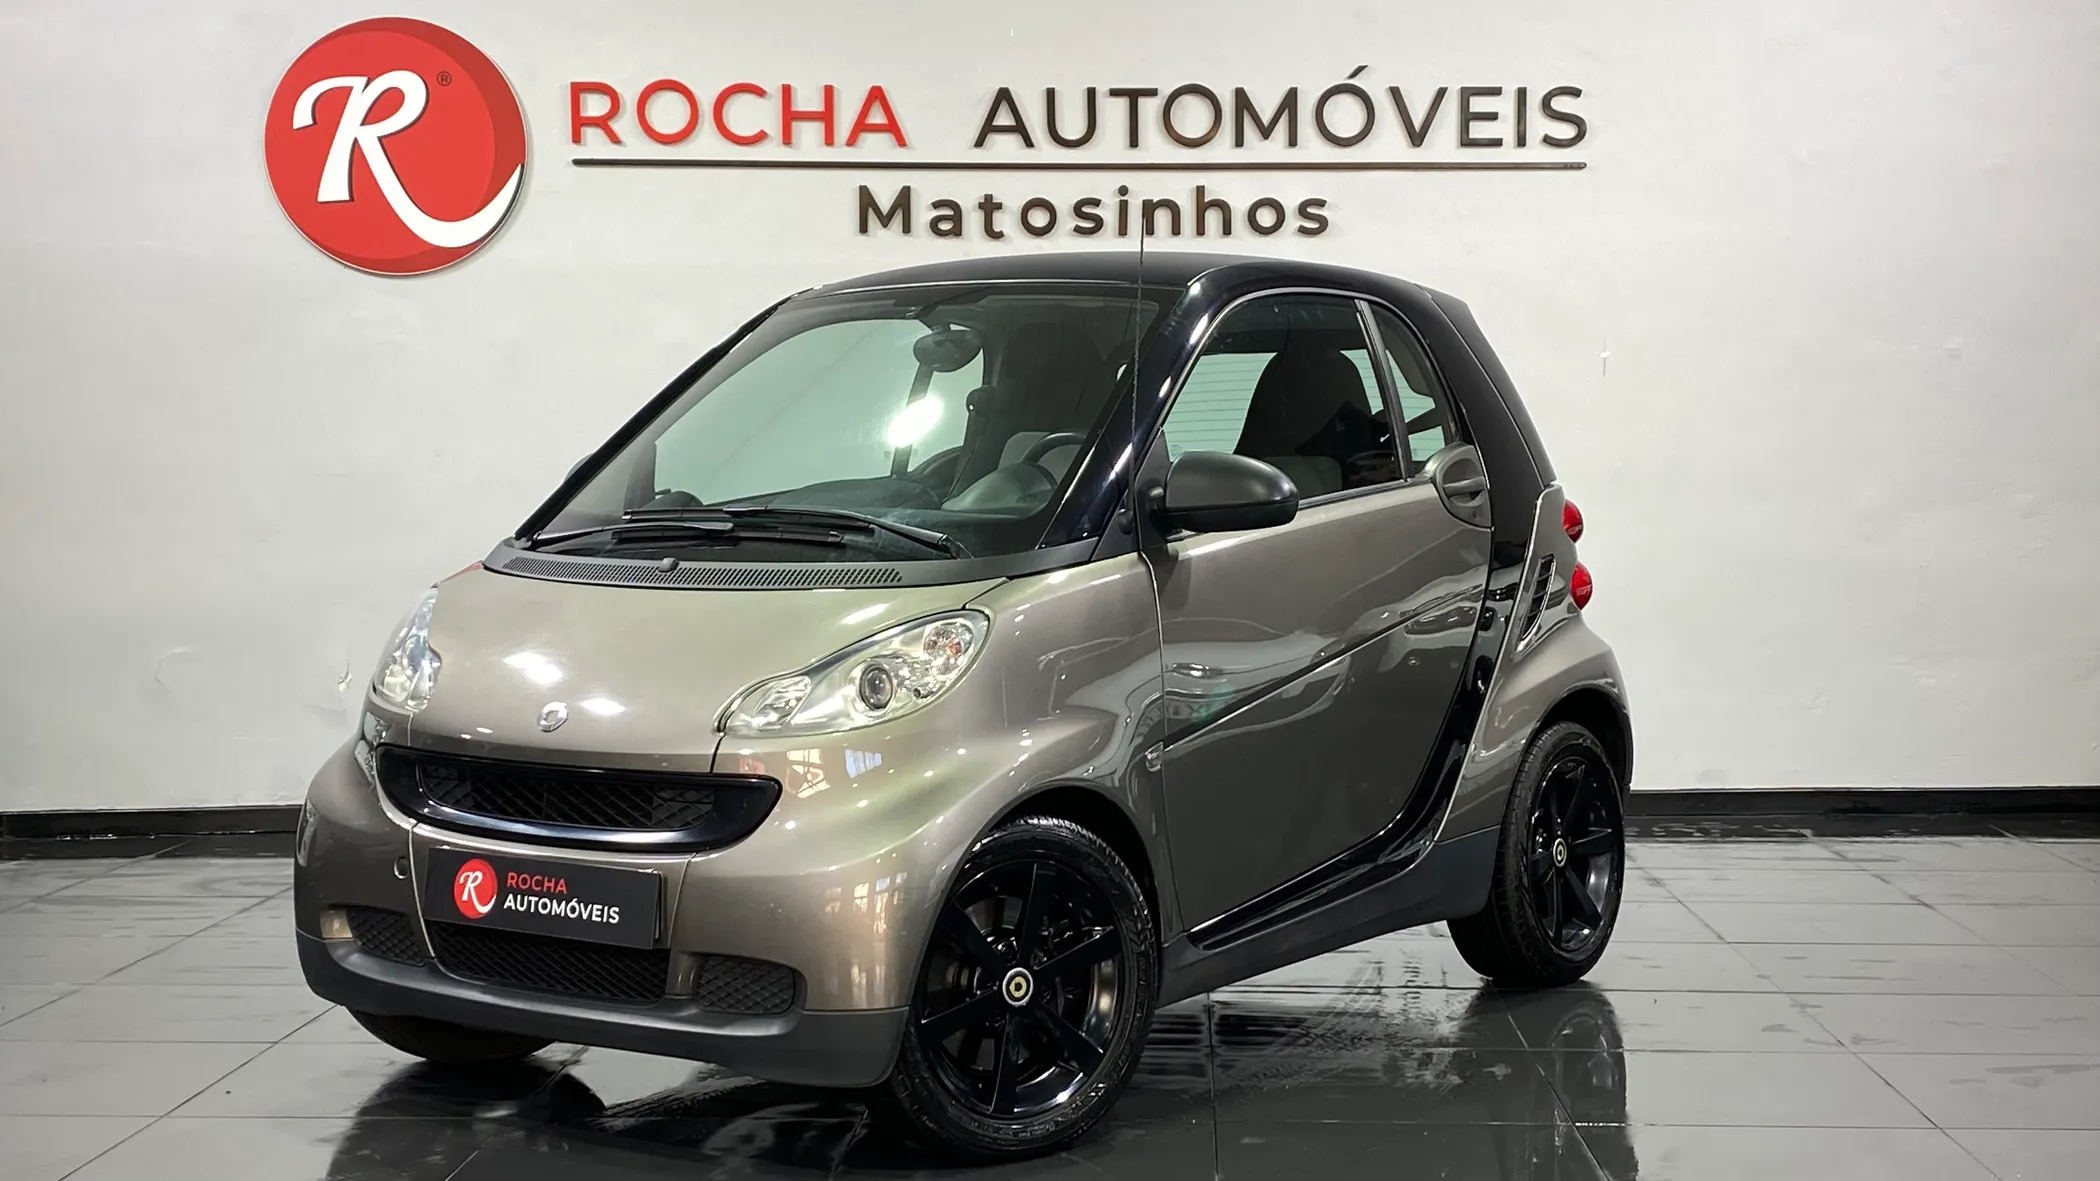 Smart ForTwo Coupé 1.0 mhd Pure 61